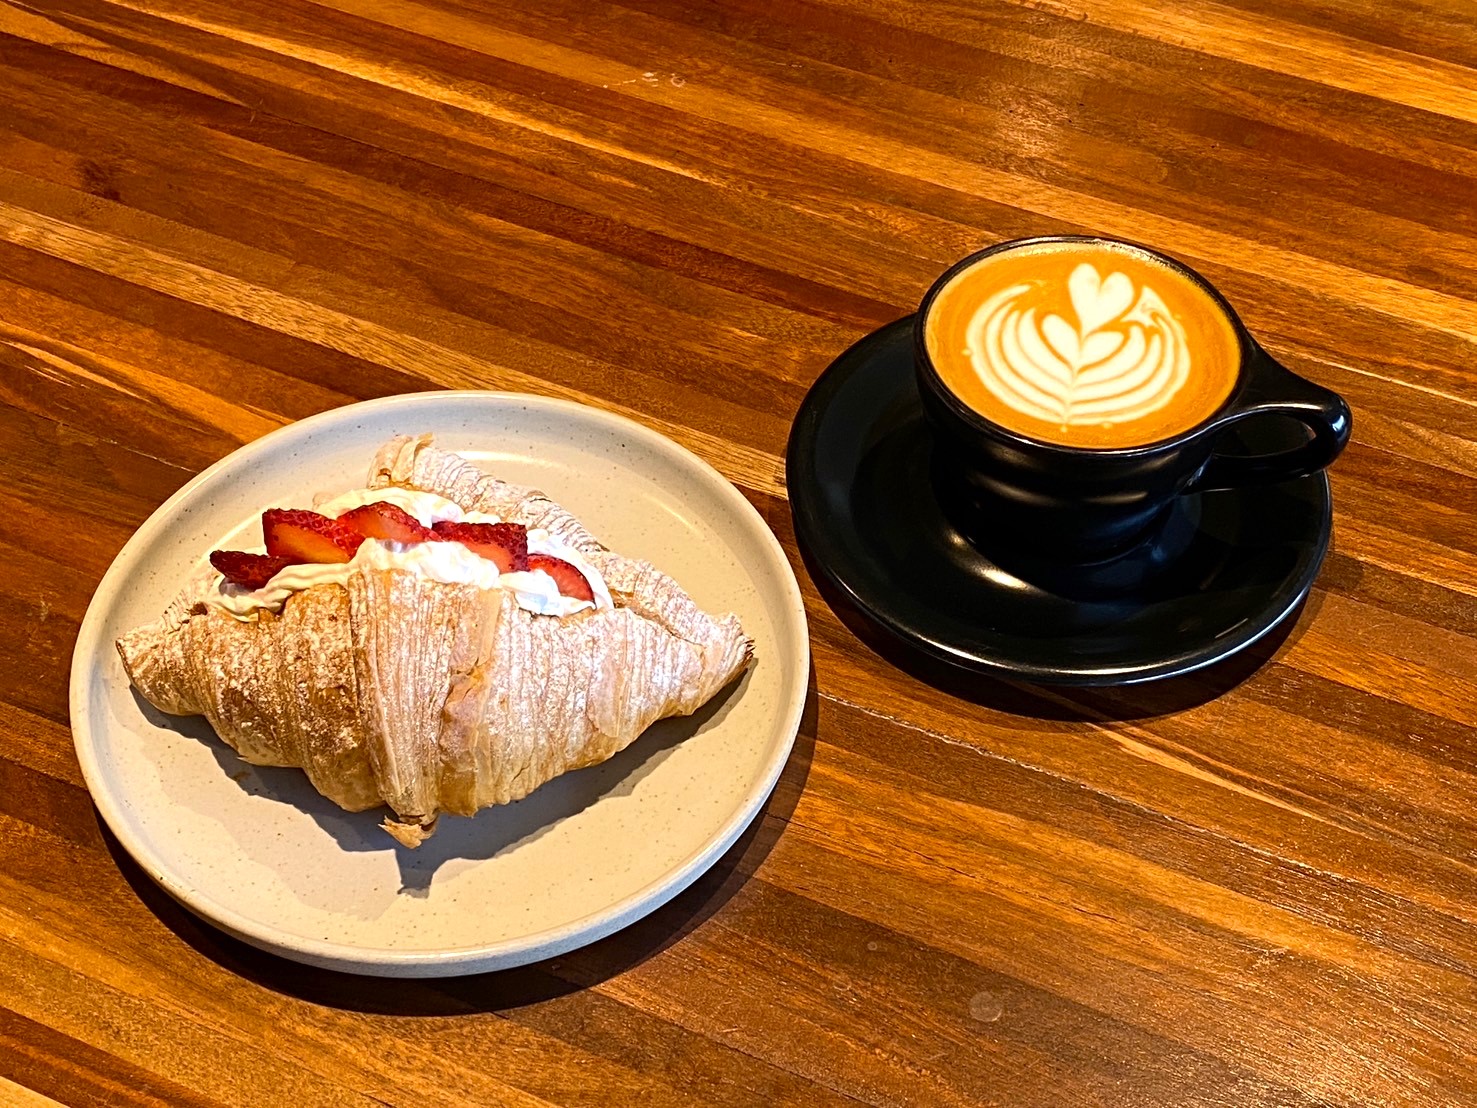 A crispy croissant with not-too-sweet cream and slightly sour strawberries. Undoubtedly the most popular item with the golden balance of the three! I am also attracted to its cute appearance✨